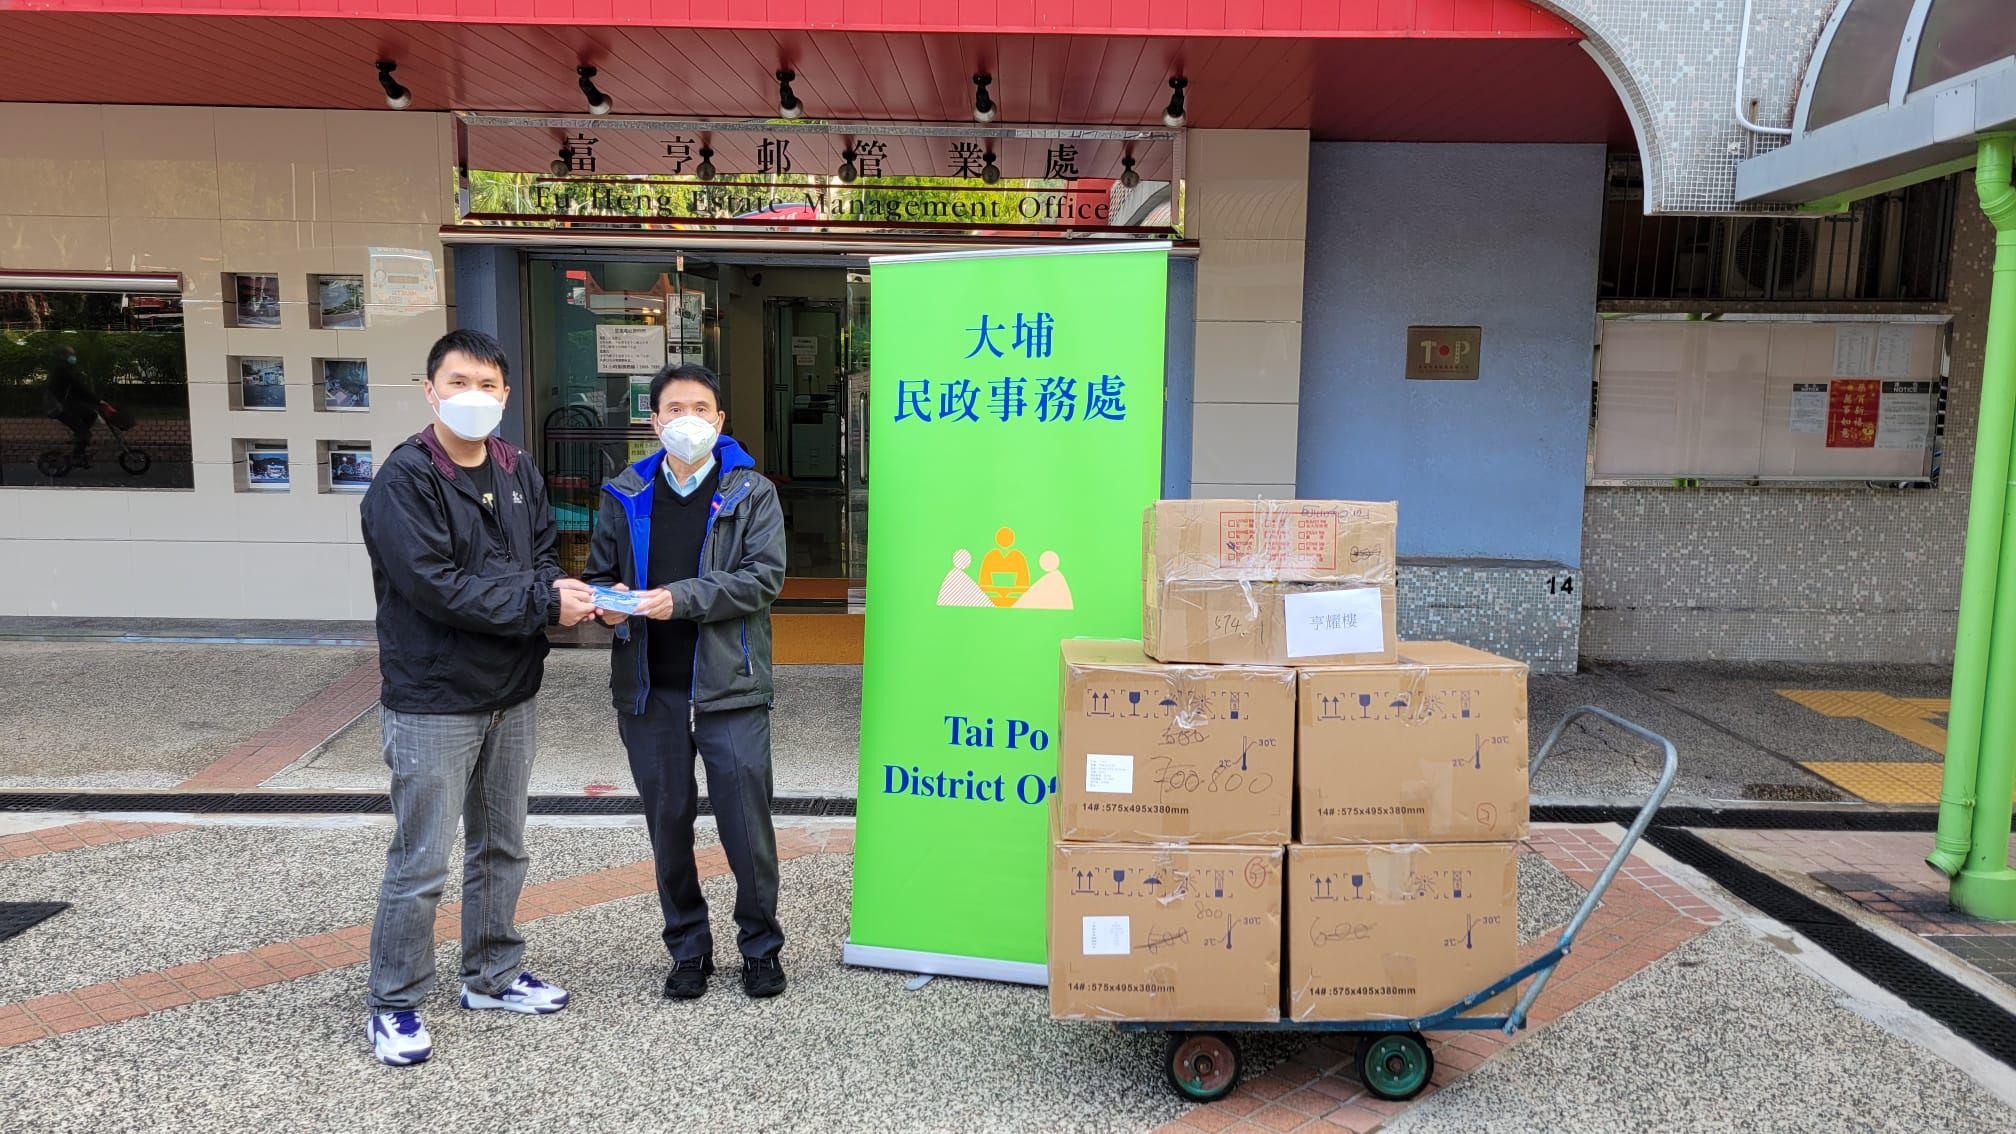 The Tai Po District Office today (February 23) distributed COVID-19 rapid test kits to households, cleansing workers and property management staff living and working in Fu Heng Estate for voluntary testing through the property management company of the Estate.